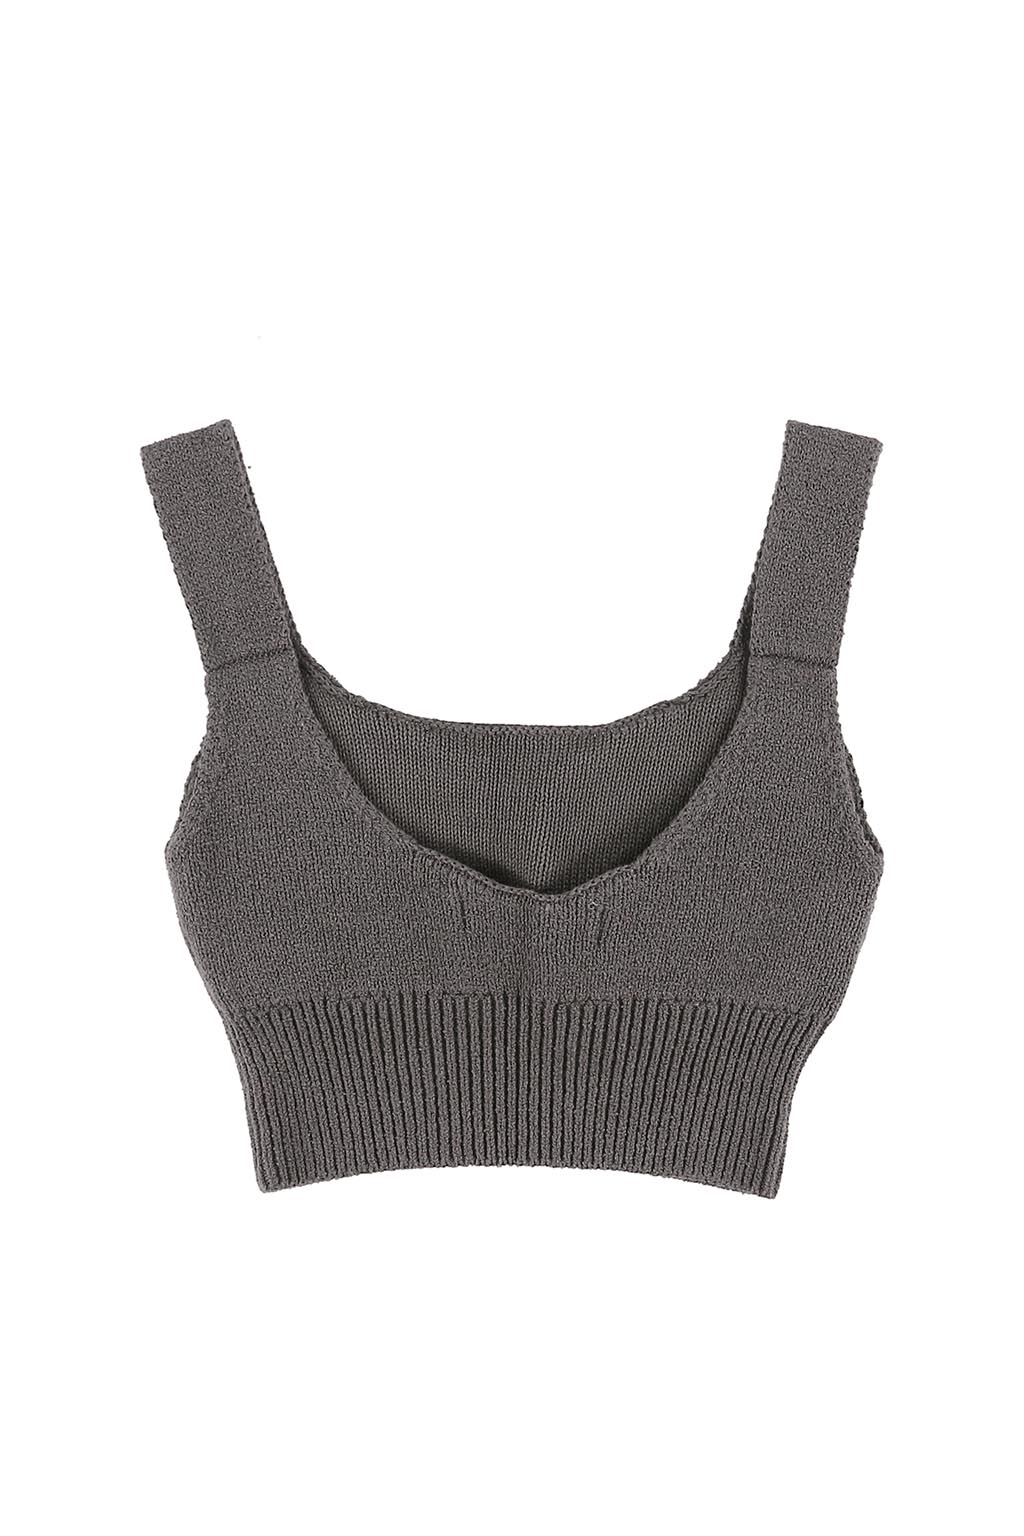 padded-knit-tank-top-chacoal-06